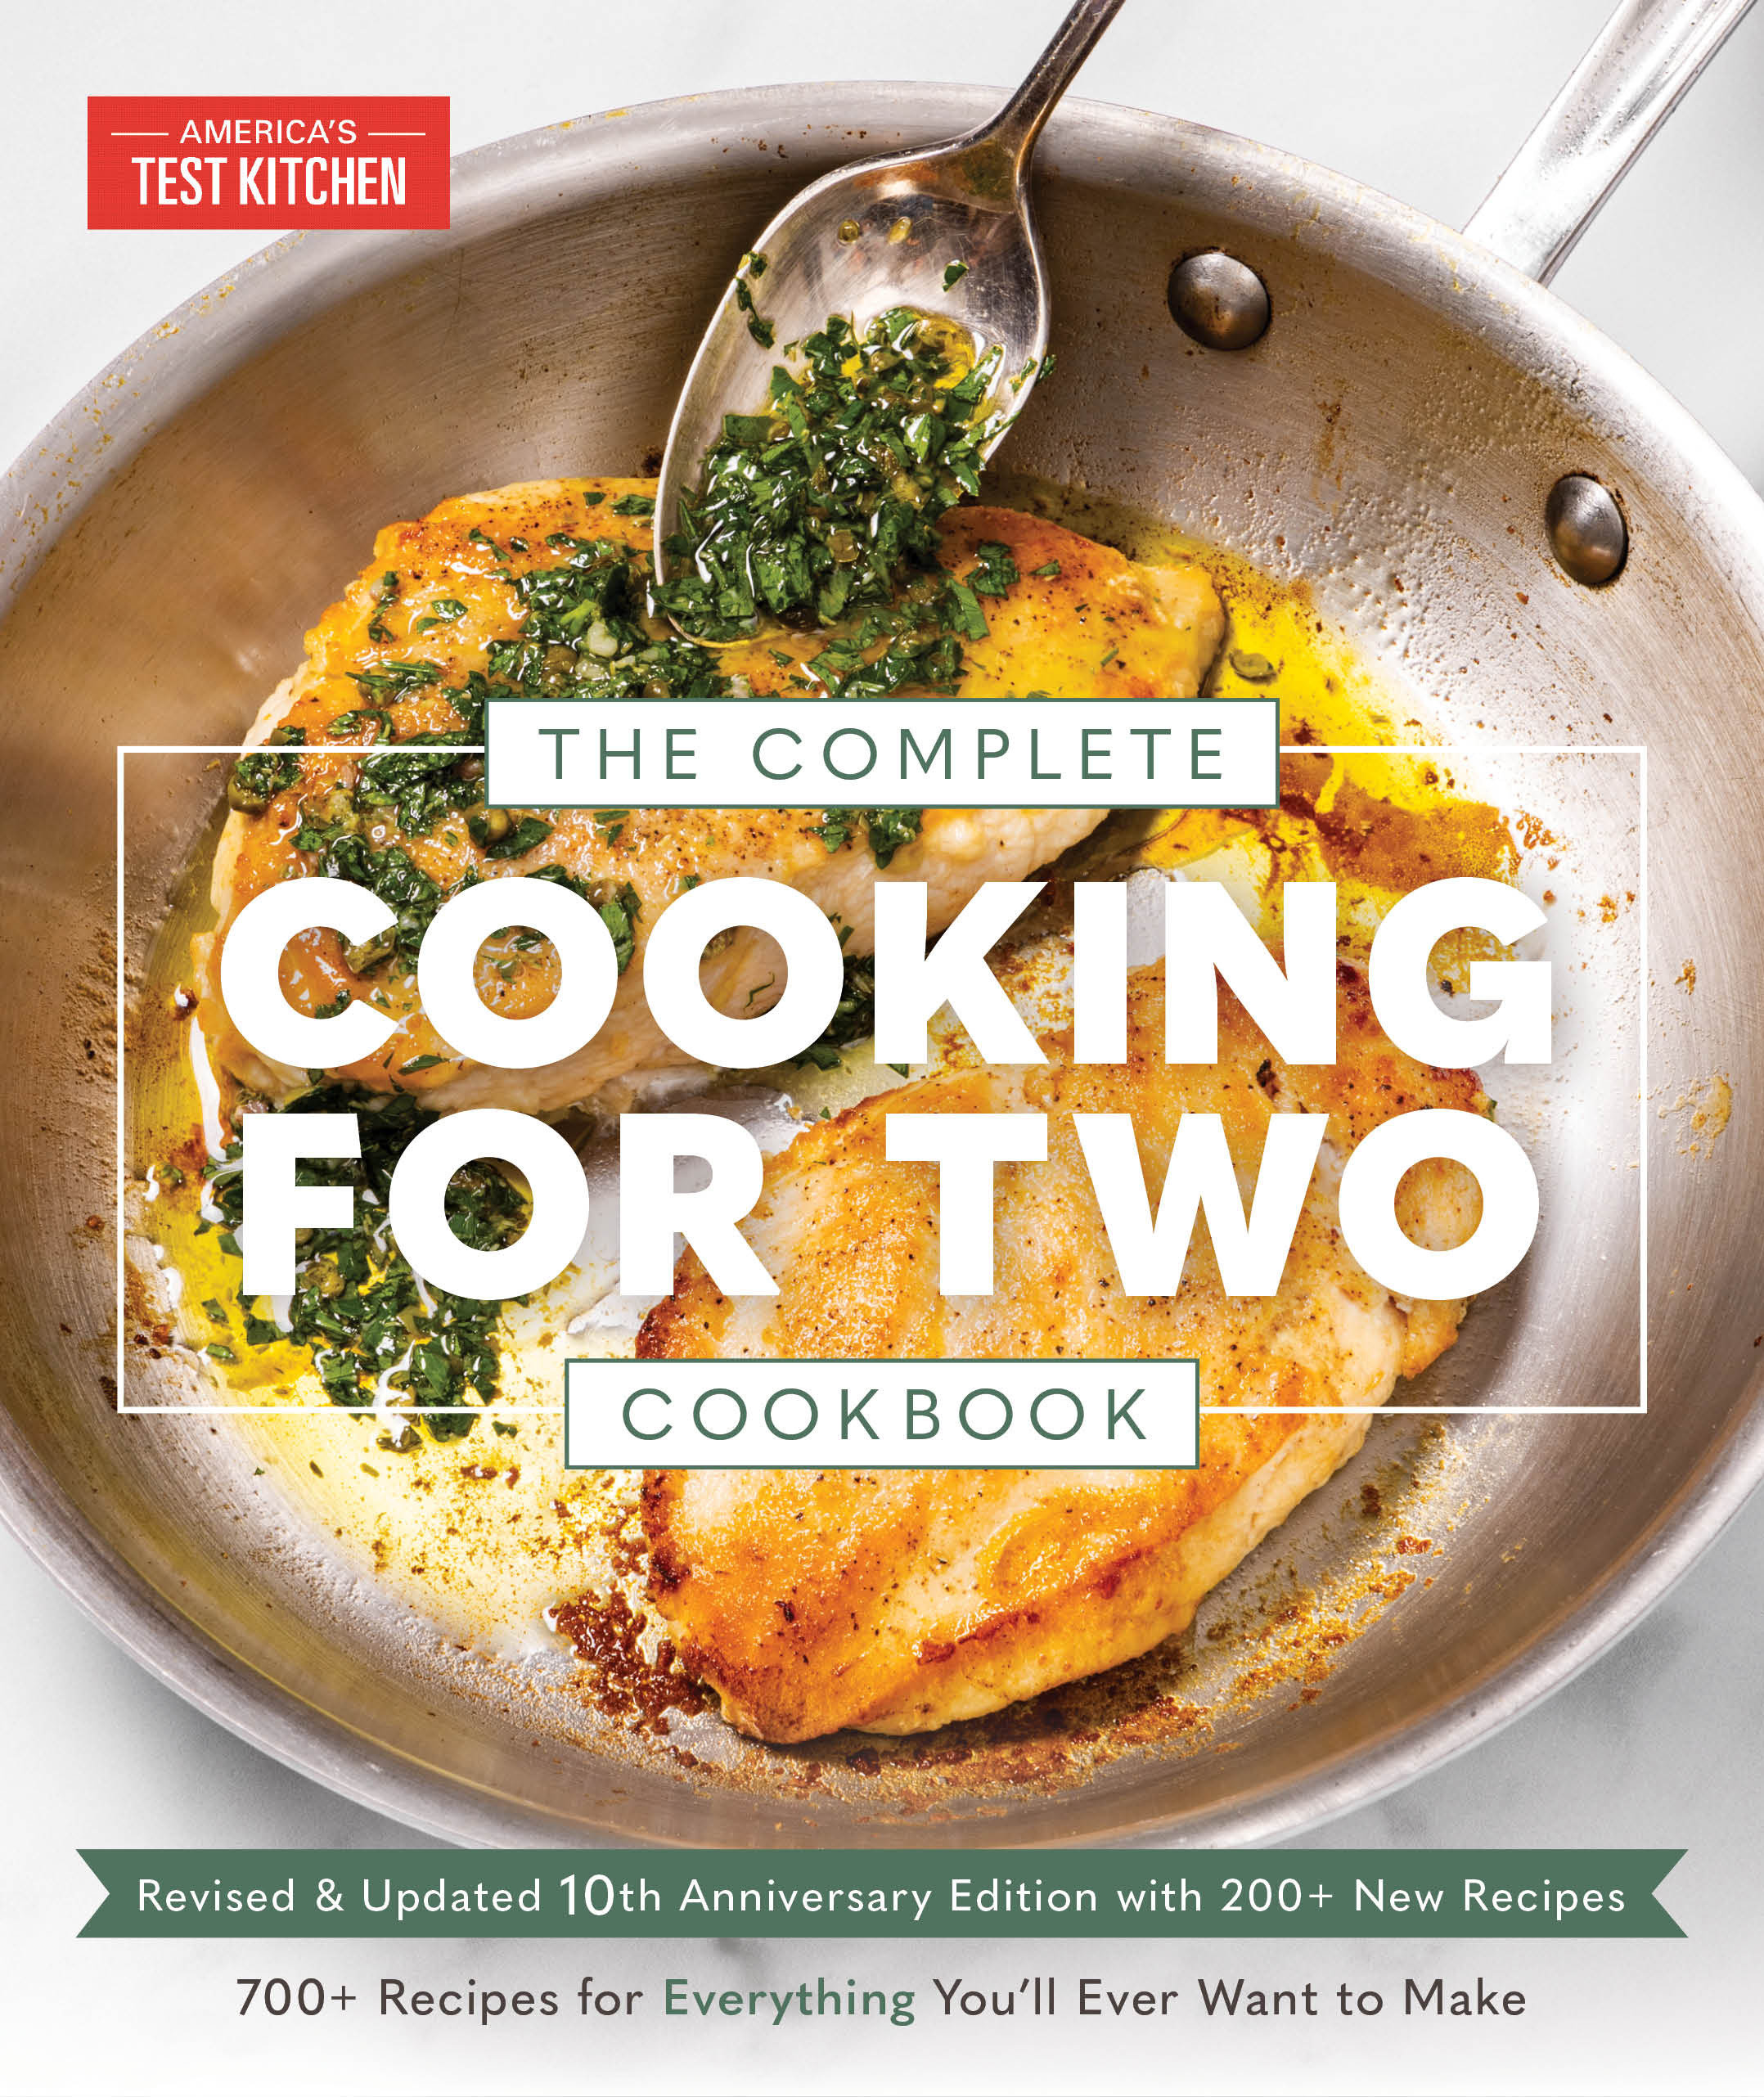 The Complete Cooking for Two Cookbook 700+ Recipes for Everything You'll Ever Want to Make cover image